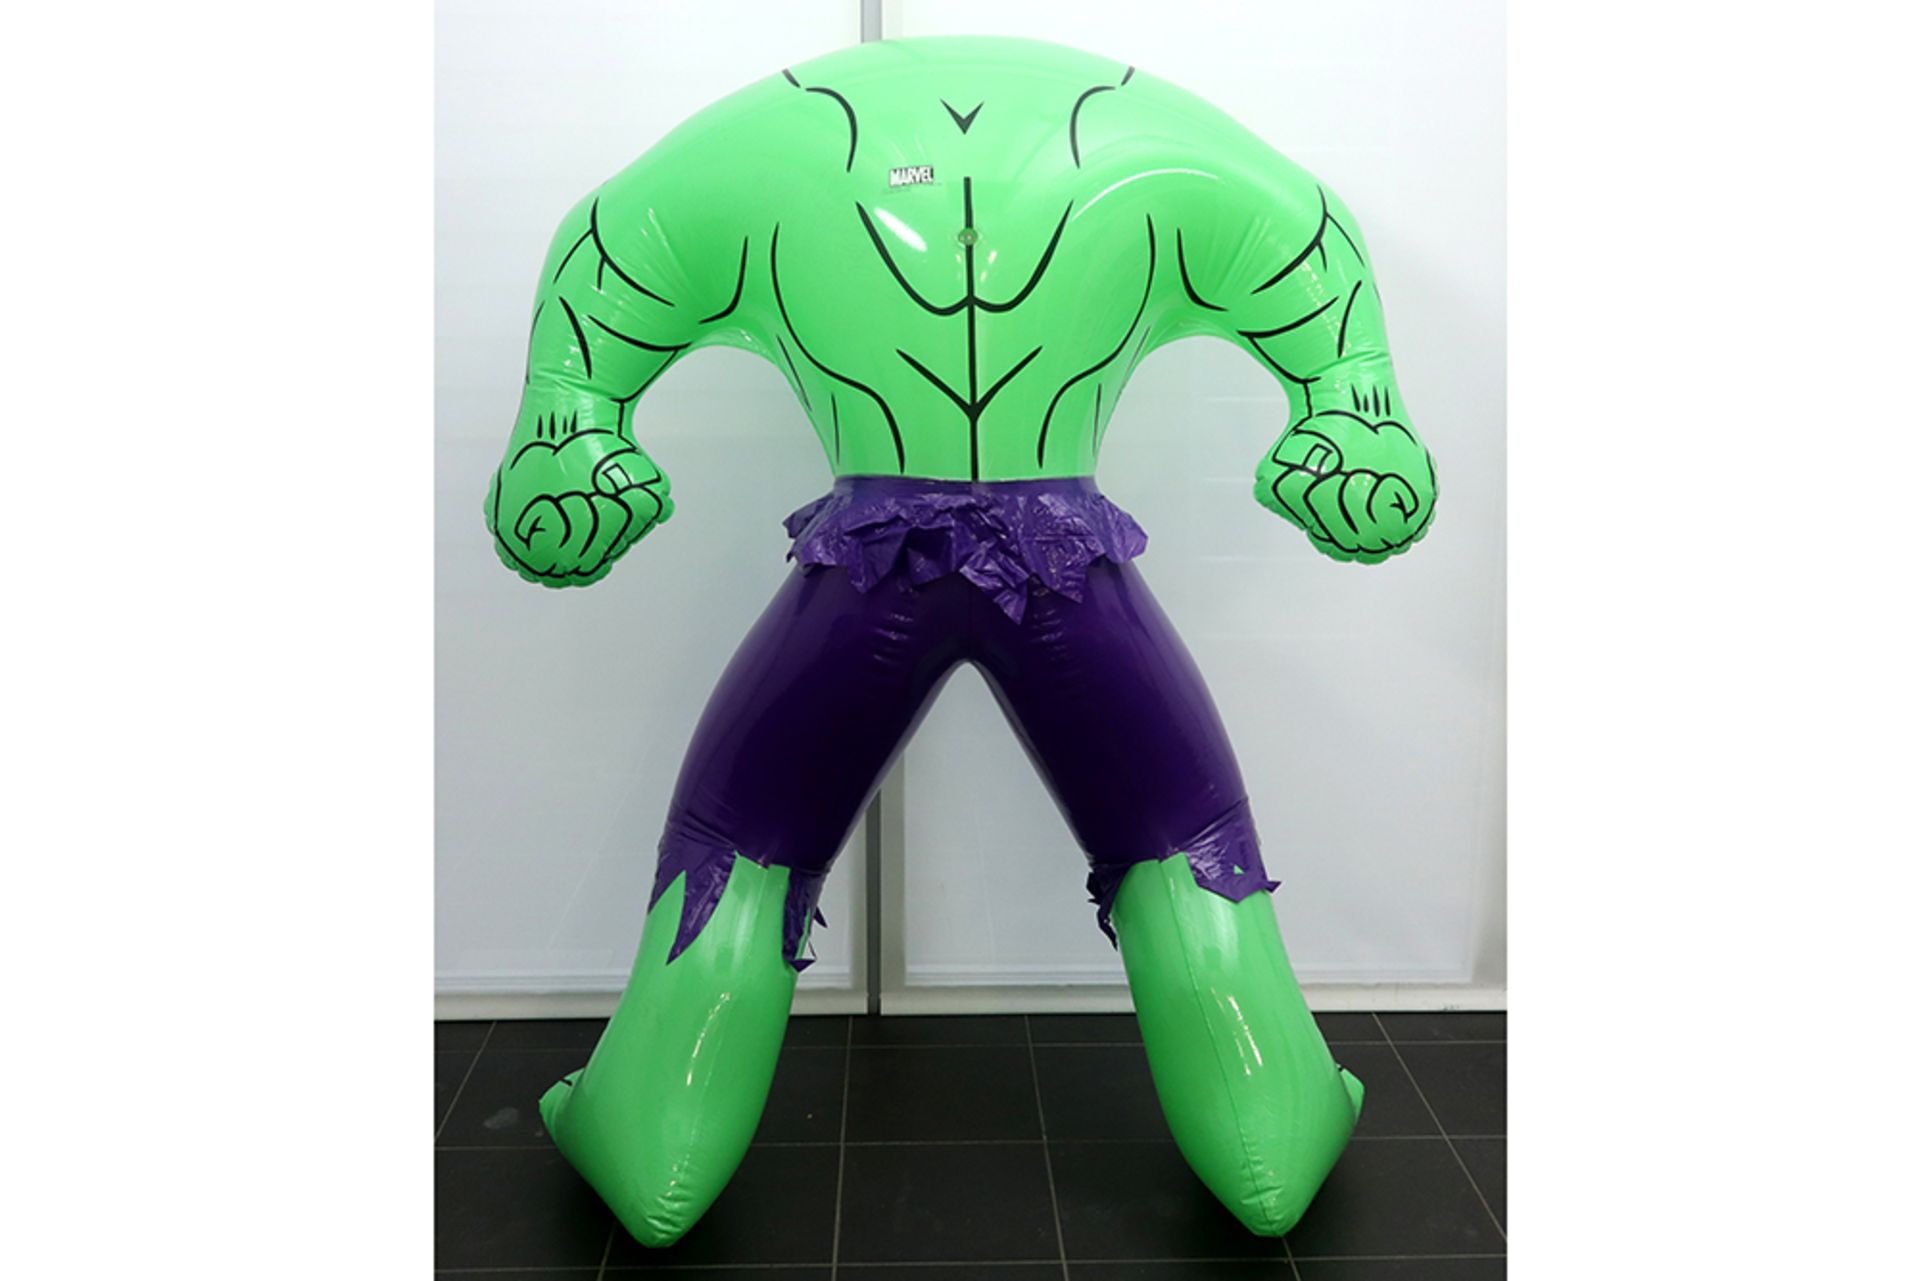 eff Koons "The Hulk" (inflatable) plastic sculpture - edition by Marvel dd 2003 these sculptures - Image 3 of 5